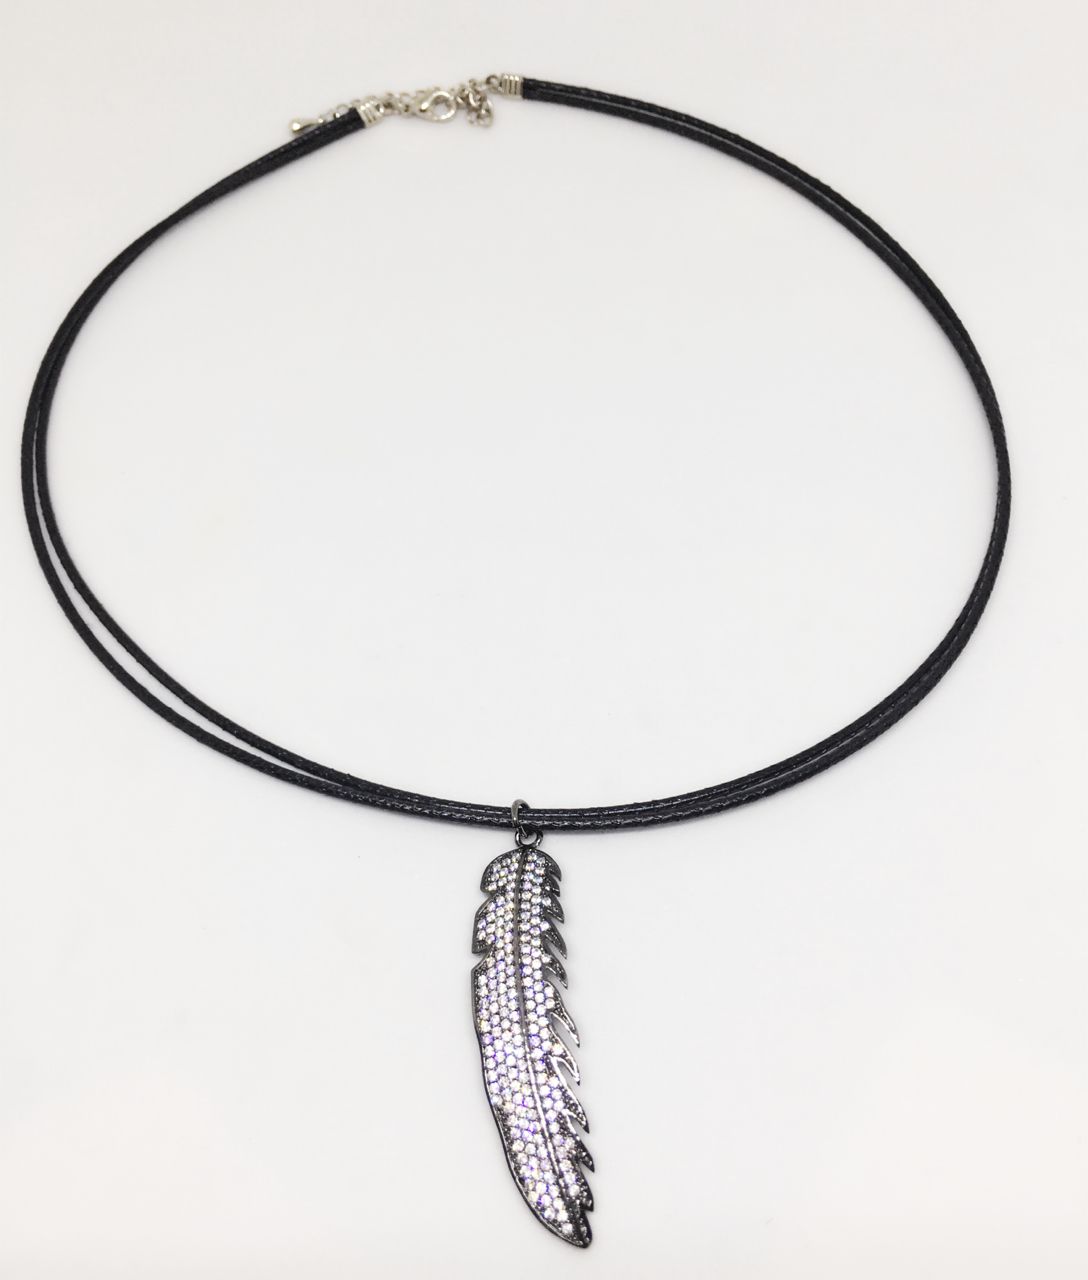 "dawn" Feather Leather Necklace For Most Recently Released Black Leather Feather Choker Necklaces (View 8 of 25)